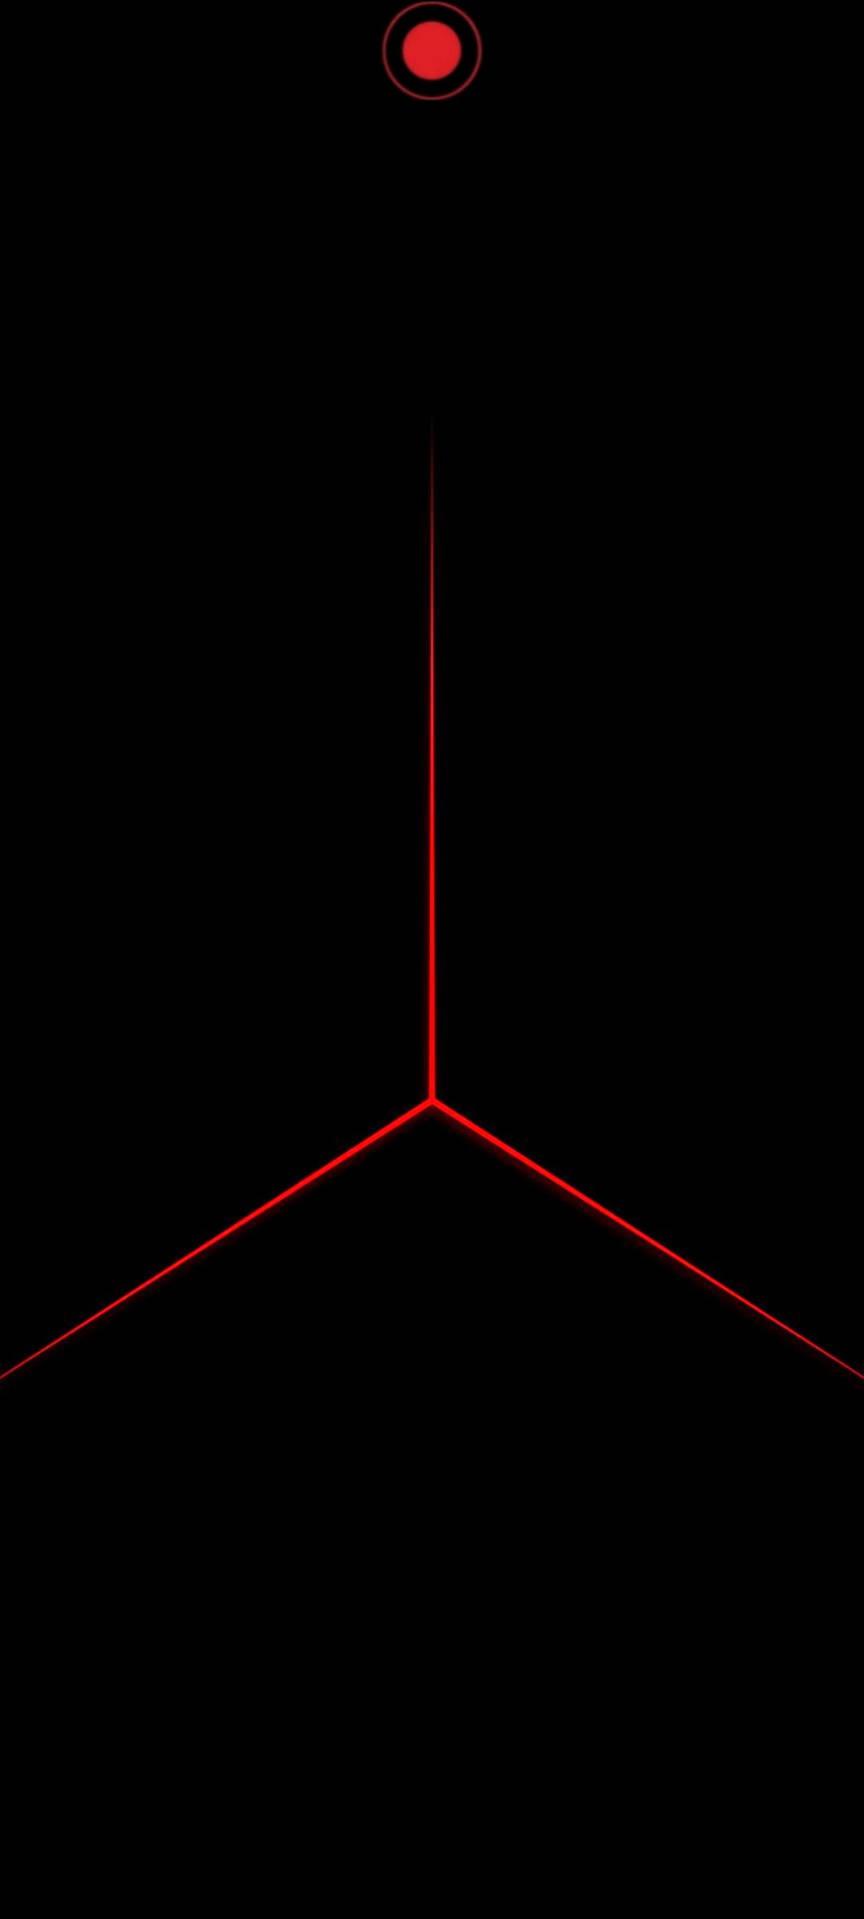 Dynamic Red Triangle Pattern For Redmi Note Punch Hole